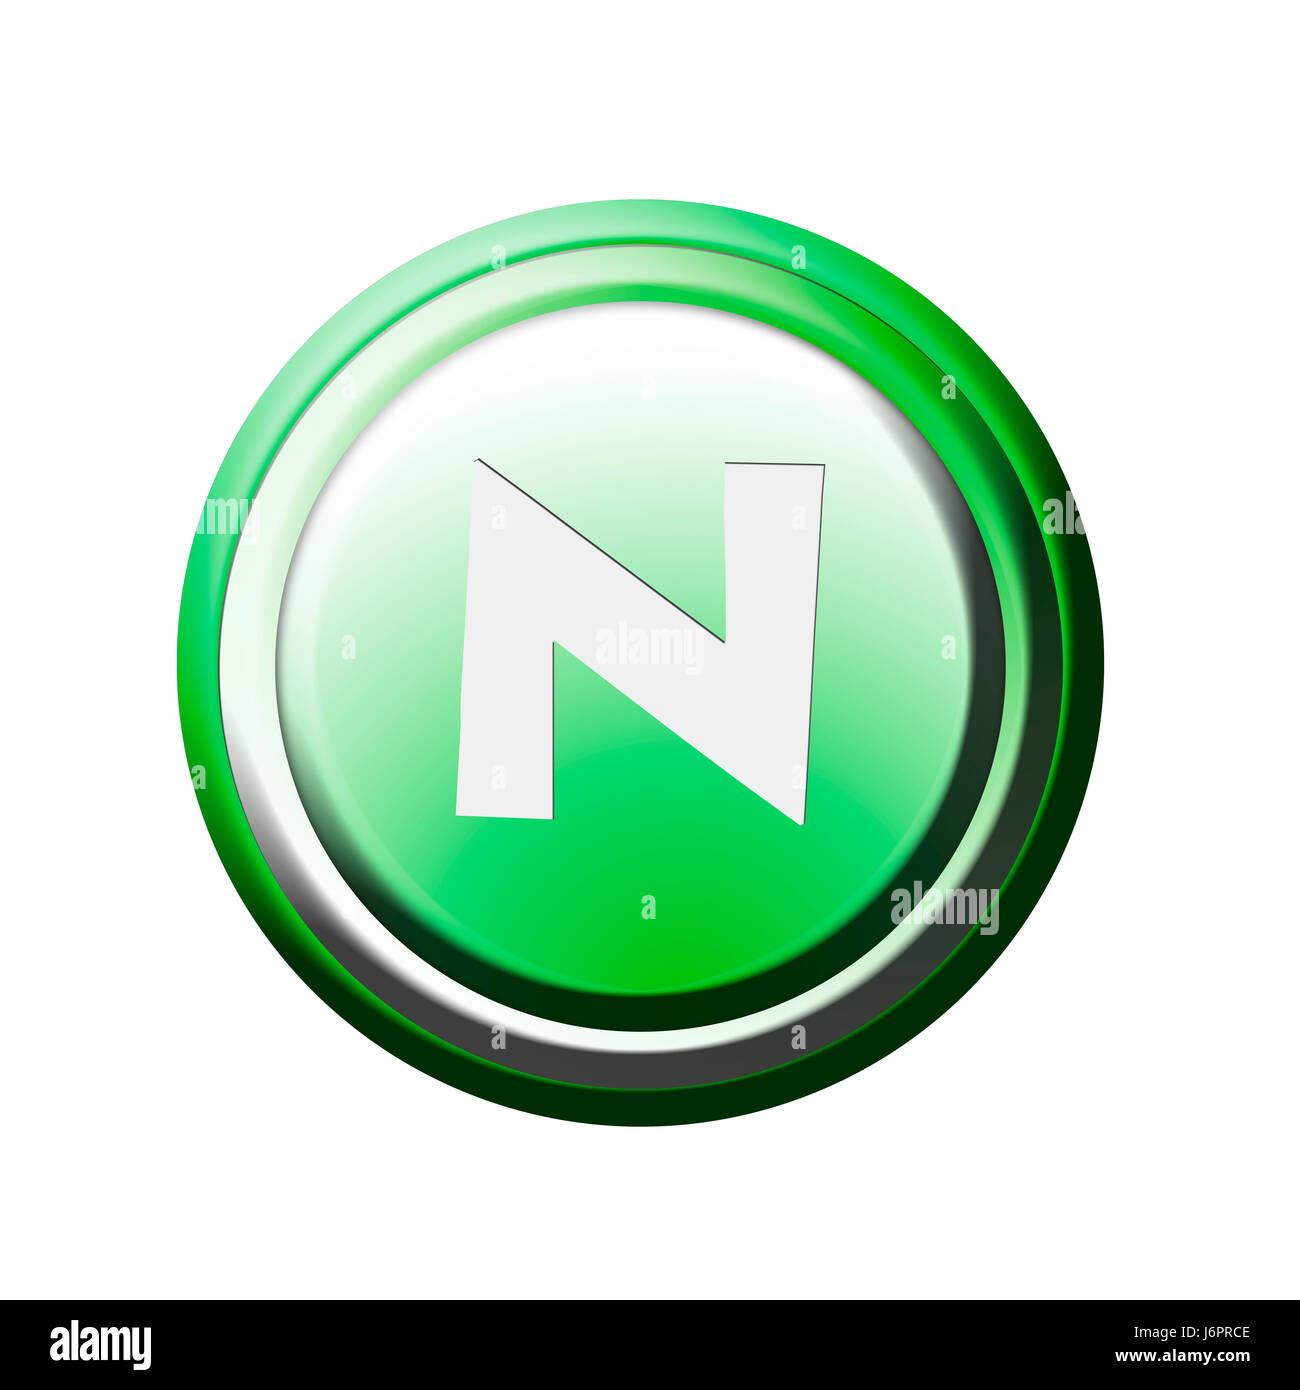 button with letter n Stock Photo